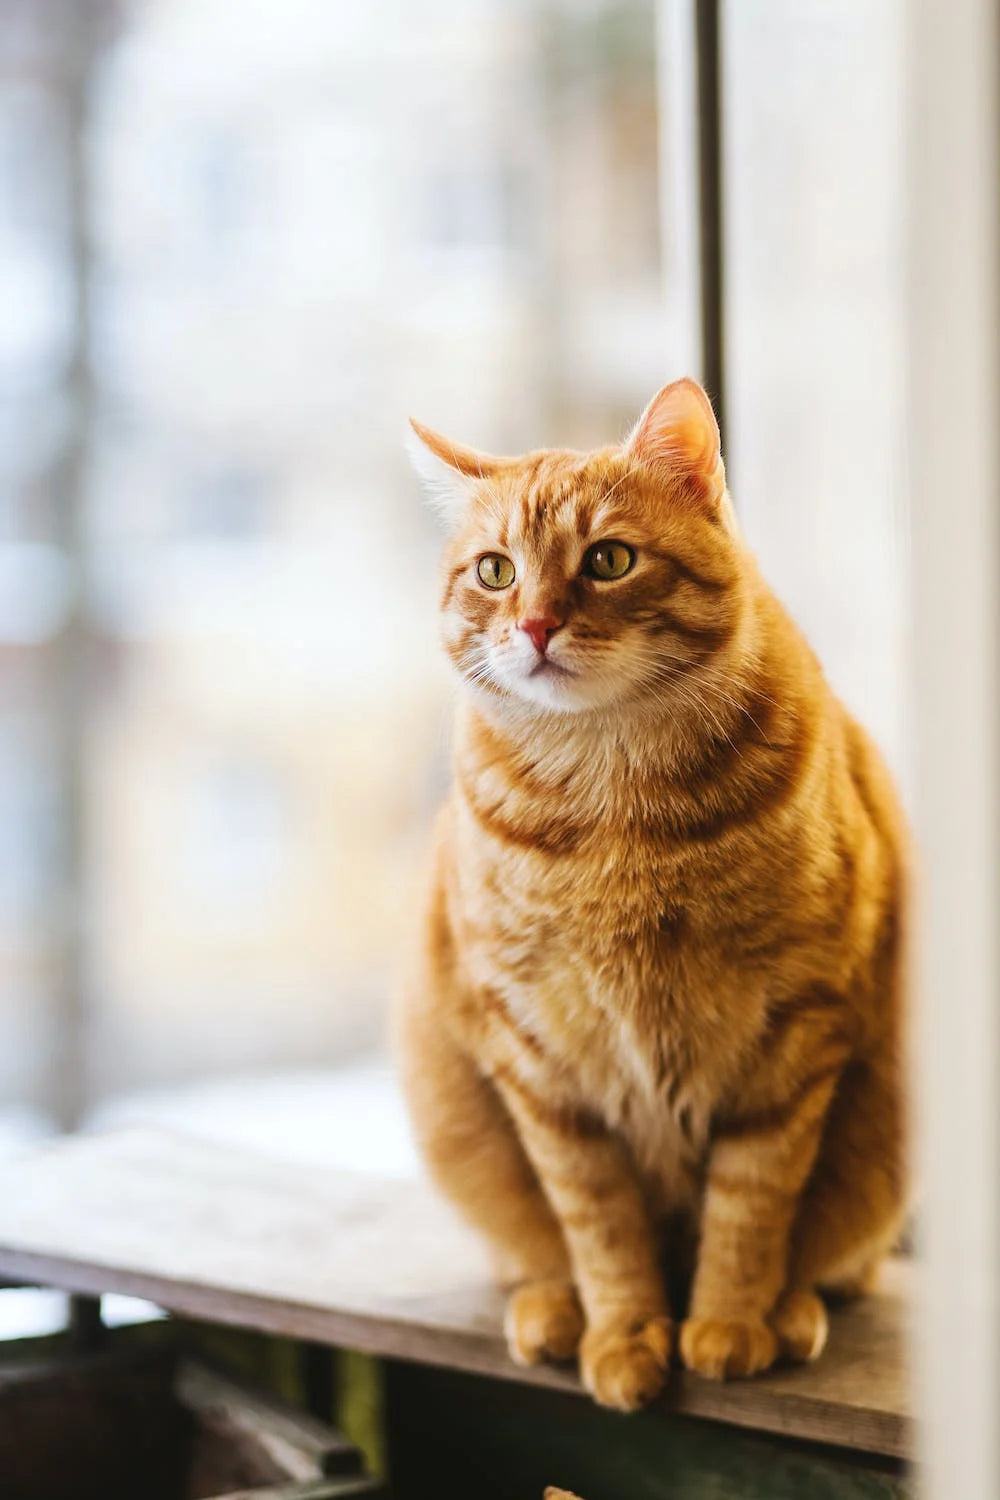 Common human foods that are toxic to cats